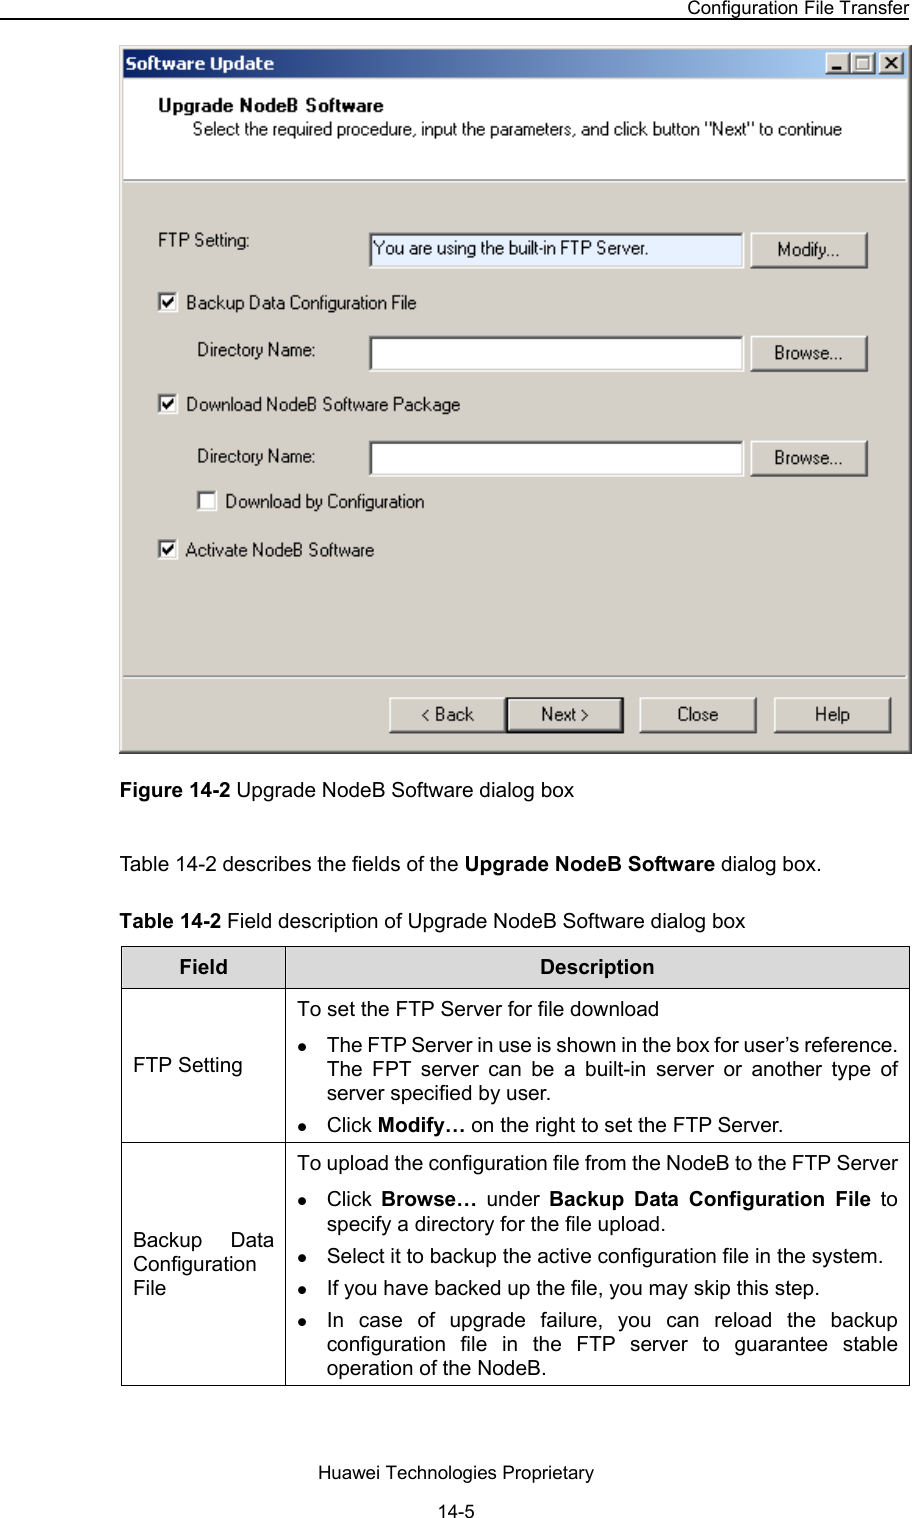 NodeB LMT User Guide Chapter 14  NodeB Software Update and Data Configuration File Transfer Huawei Technologies Proprietary 14-5  Figure 14-2 Upgrade NodeB Software dialog box Table 14-2 describes the fields of the Upgrade NodeB Software dialog box.  Table 14-2 Field description of Upgrade NodeB Software dialog box Field   Description  FTP Setting To set the FTP Server for file download z The FTP Server in use is shown in the box for user’s reference. The FPT server can be a built-in server or another type of server specified by user. z Click Modify… on the right to set the FTP Server. Backup Data Configuration File  To upload the configuration file from the NodeB to the FTP Serverz Click  Browse… under Backup Data Configuration File to specify a directory for the file upload. z Select it to backup the active configuration file in the system.  z If you have backed up the file, you may skip this step. z In case of upgrade failure, you can reload the backup configuration file in the FTP server to guarantee stable operation of the NodeB. 